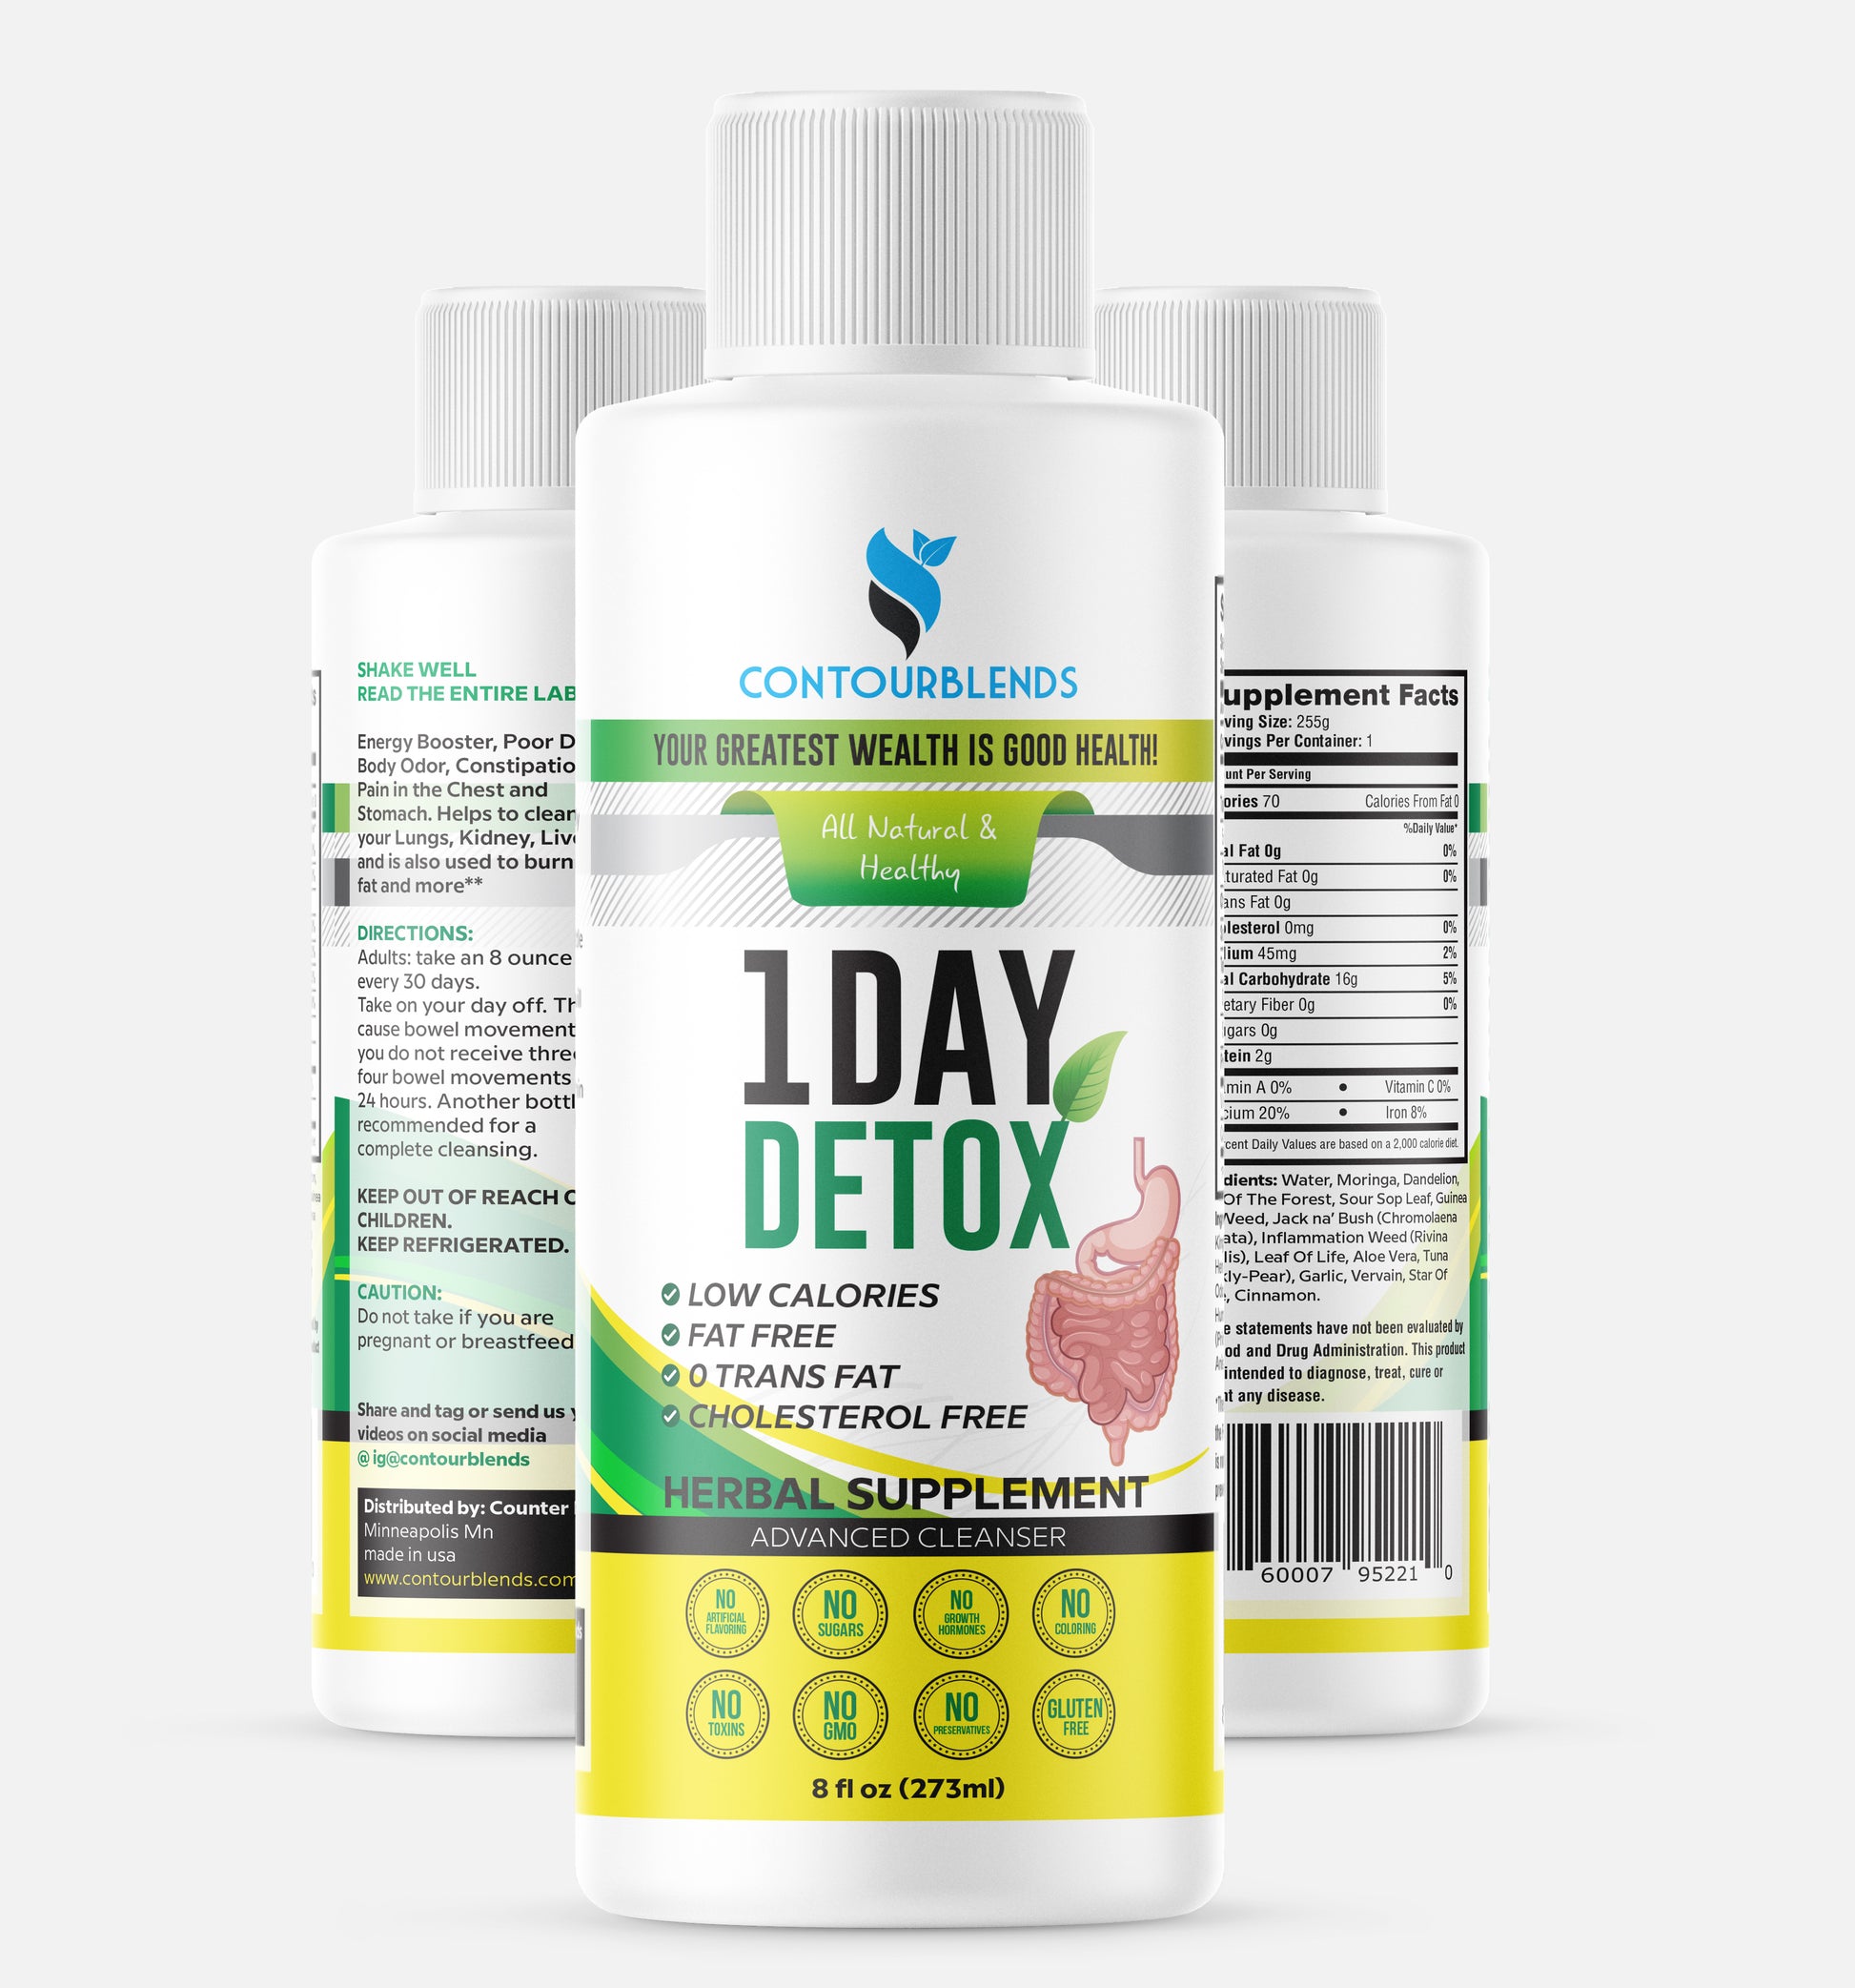 One day detox colon cleanse in the USA